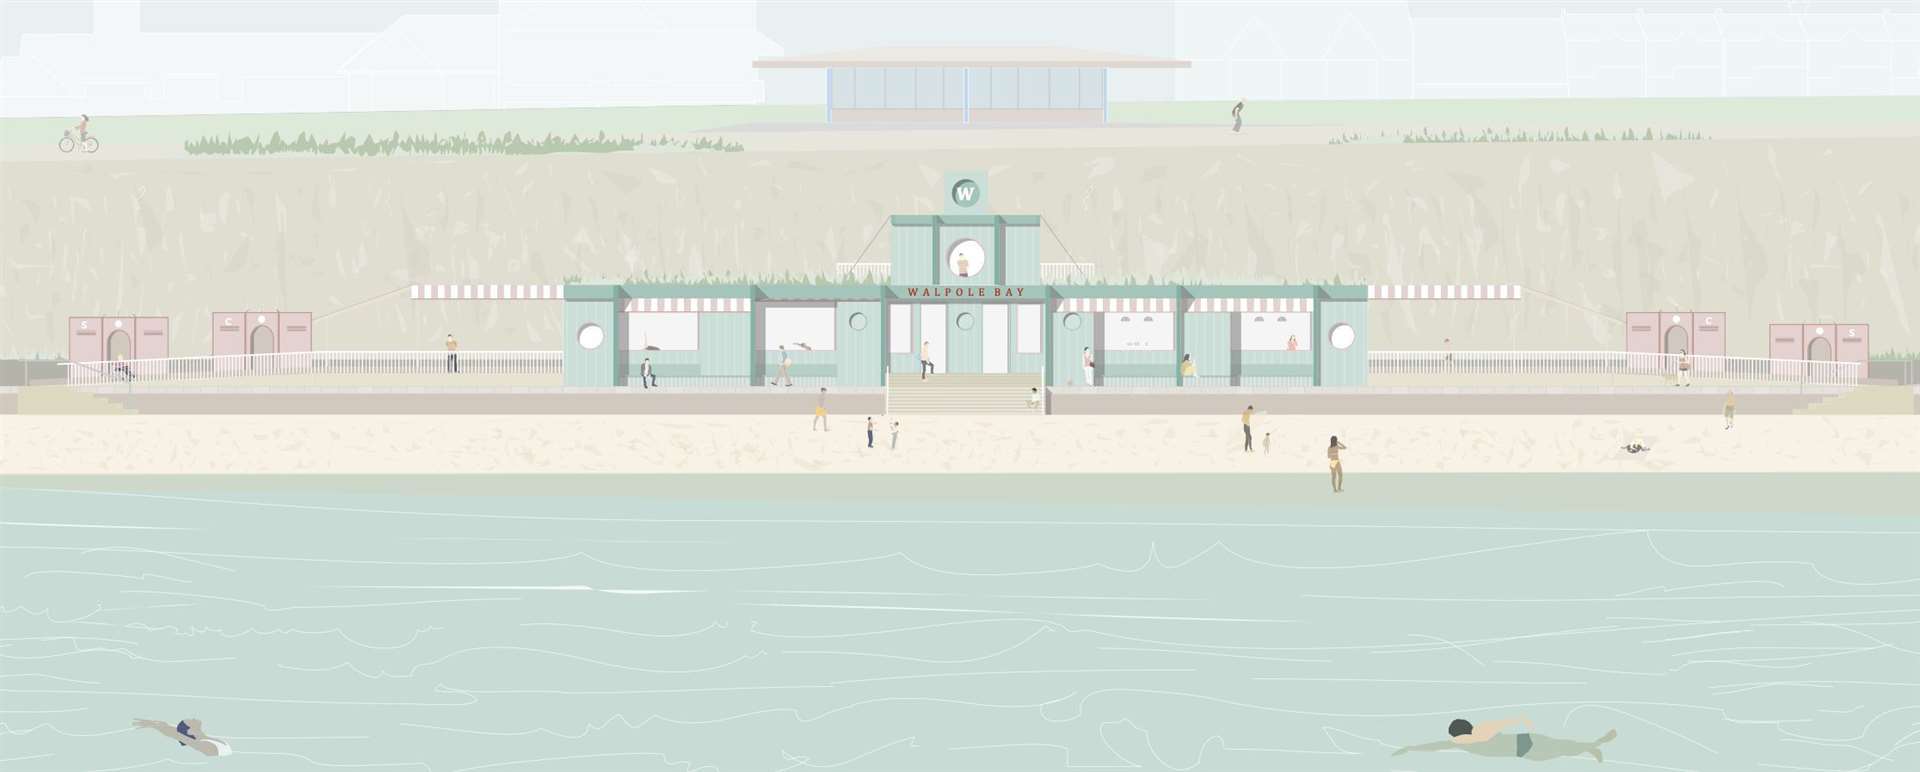 The potential new pavilion at Walpole Bay, Margate. Picture: Thanet District Council